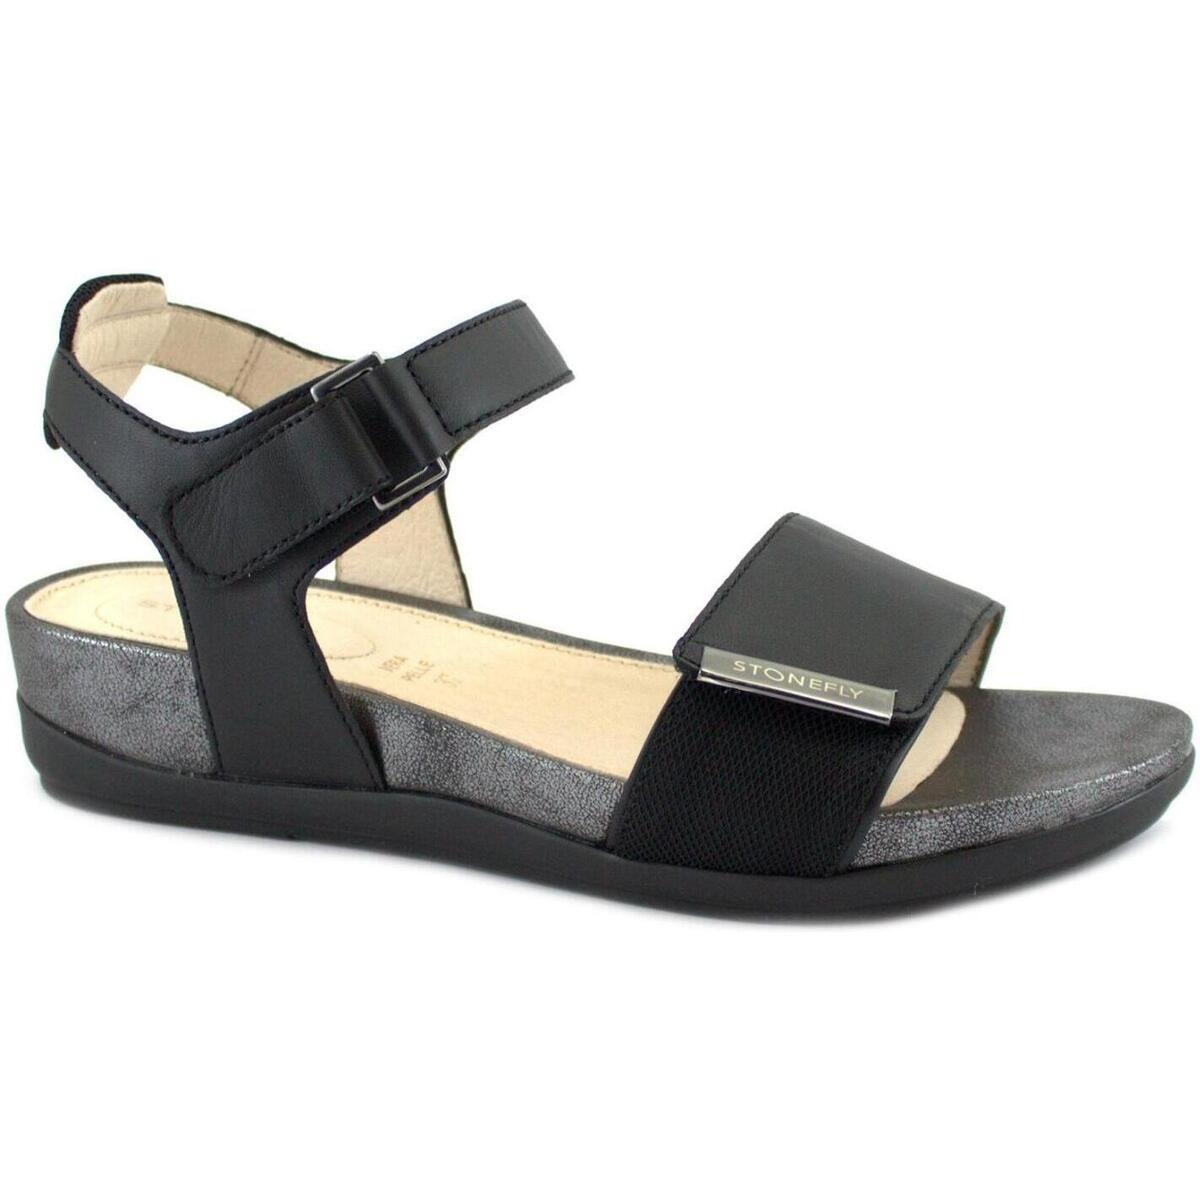 Spartoo - Women's Sandals Black from Stonefly GOOFASH